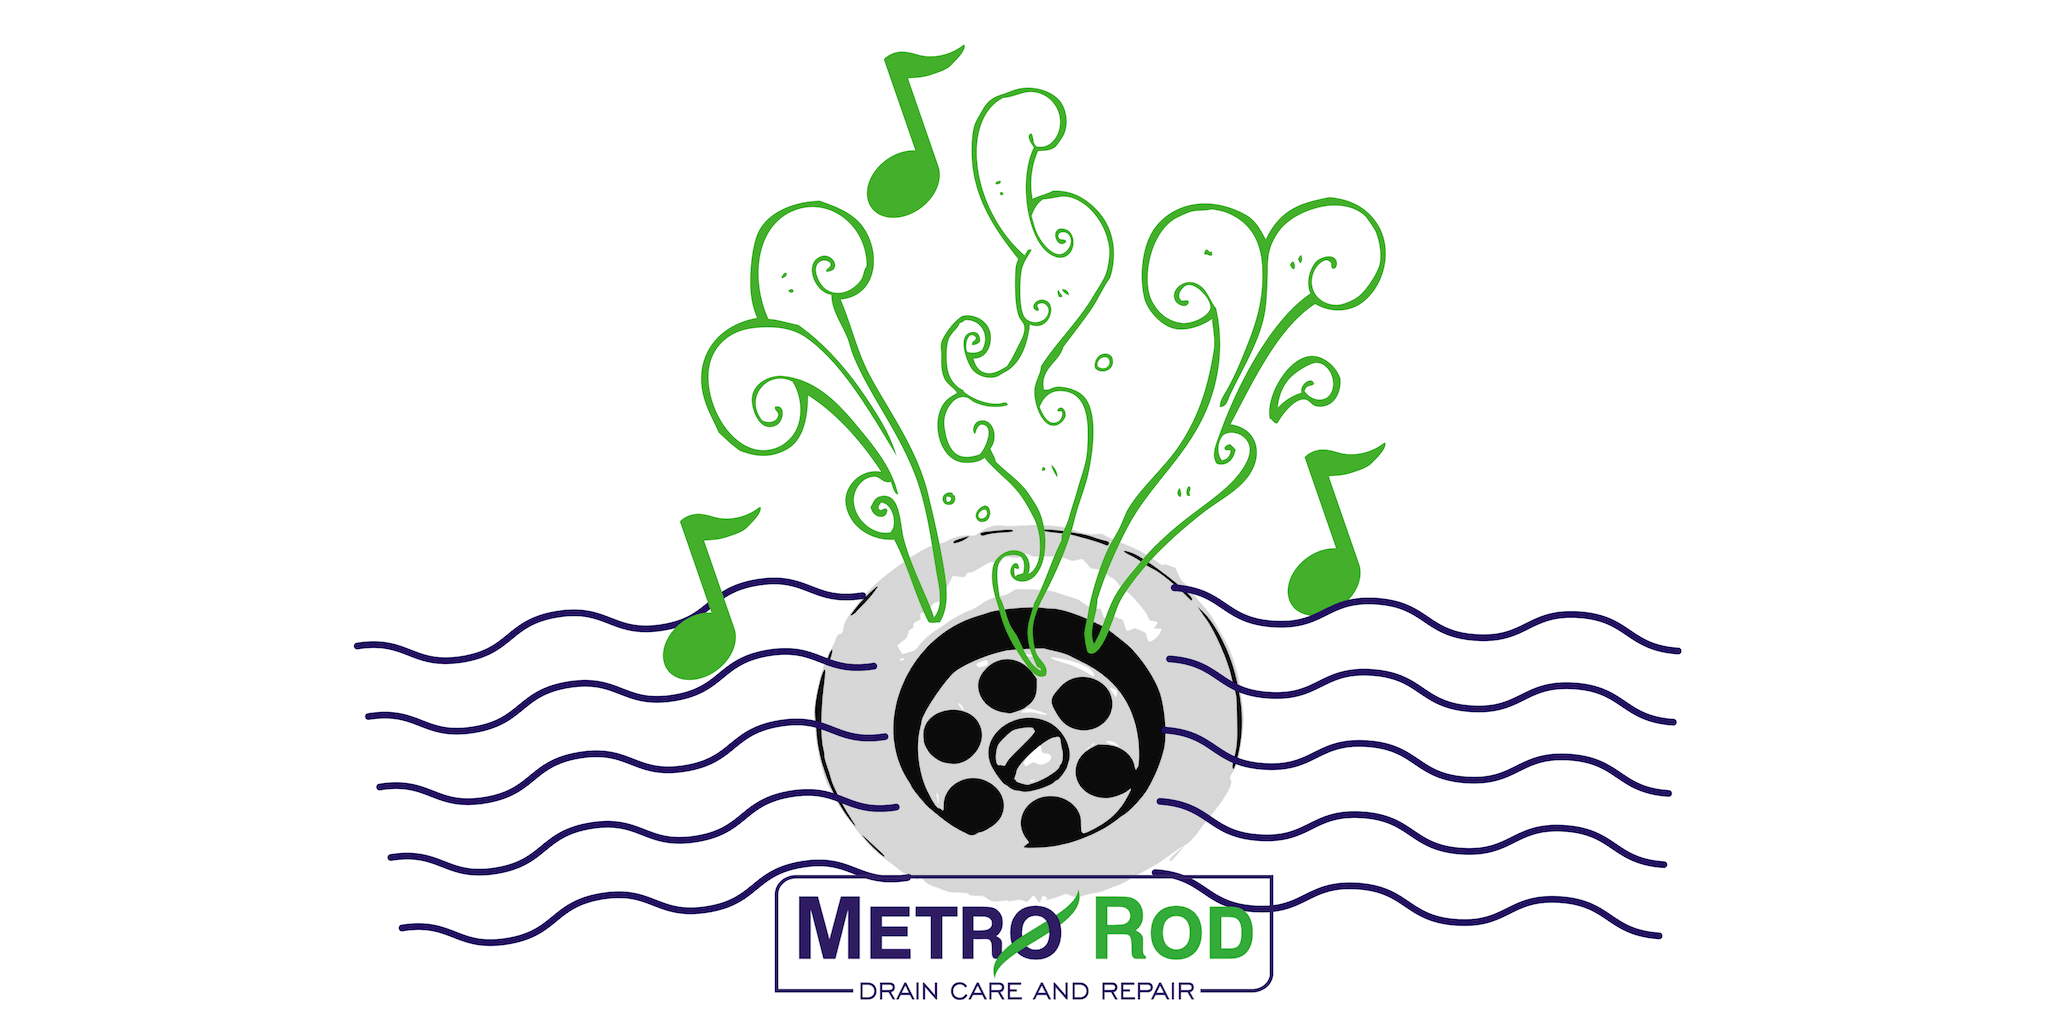 SMELLY DRAINS CAUSING YOU PROBLEMS? – METRO ROD NOTTINGHAM